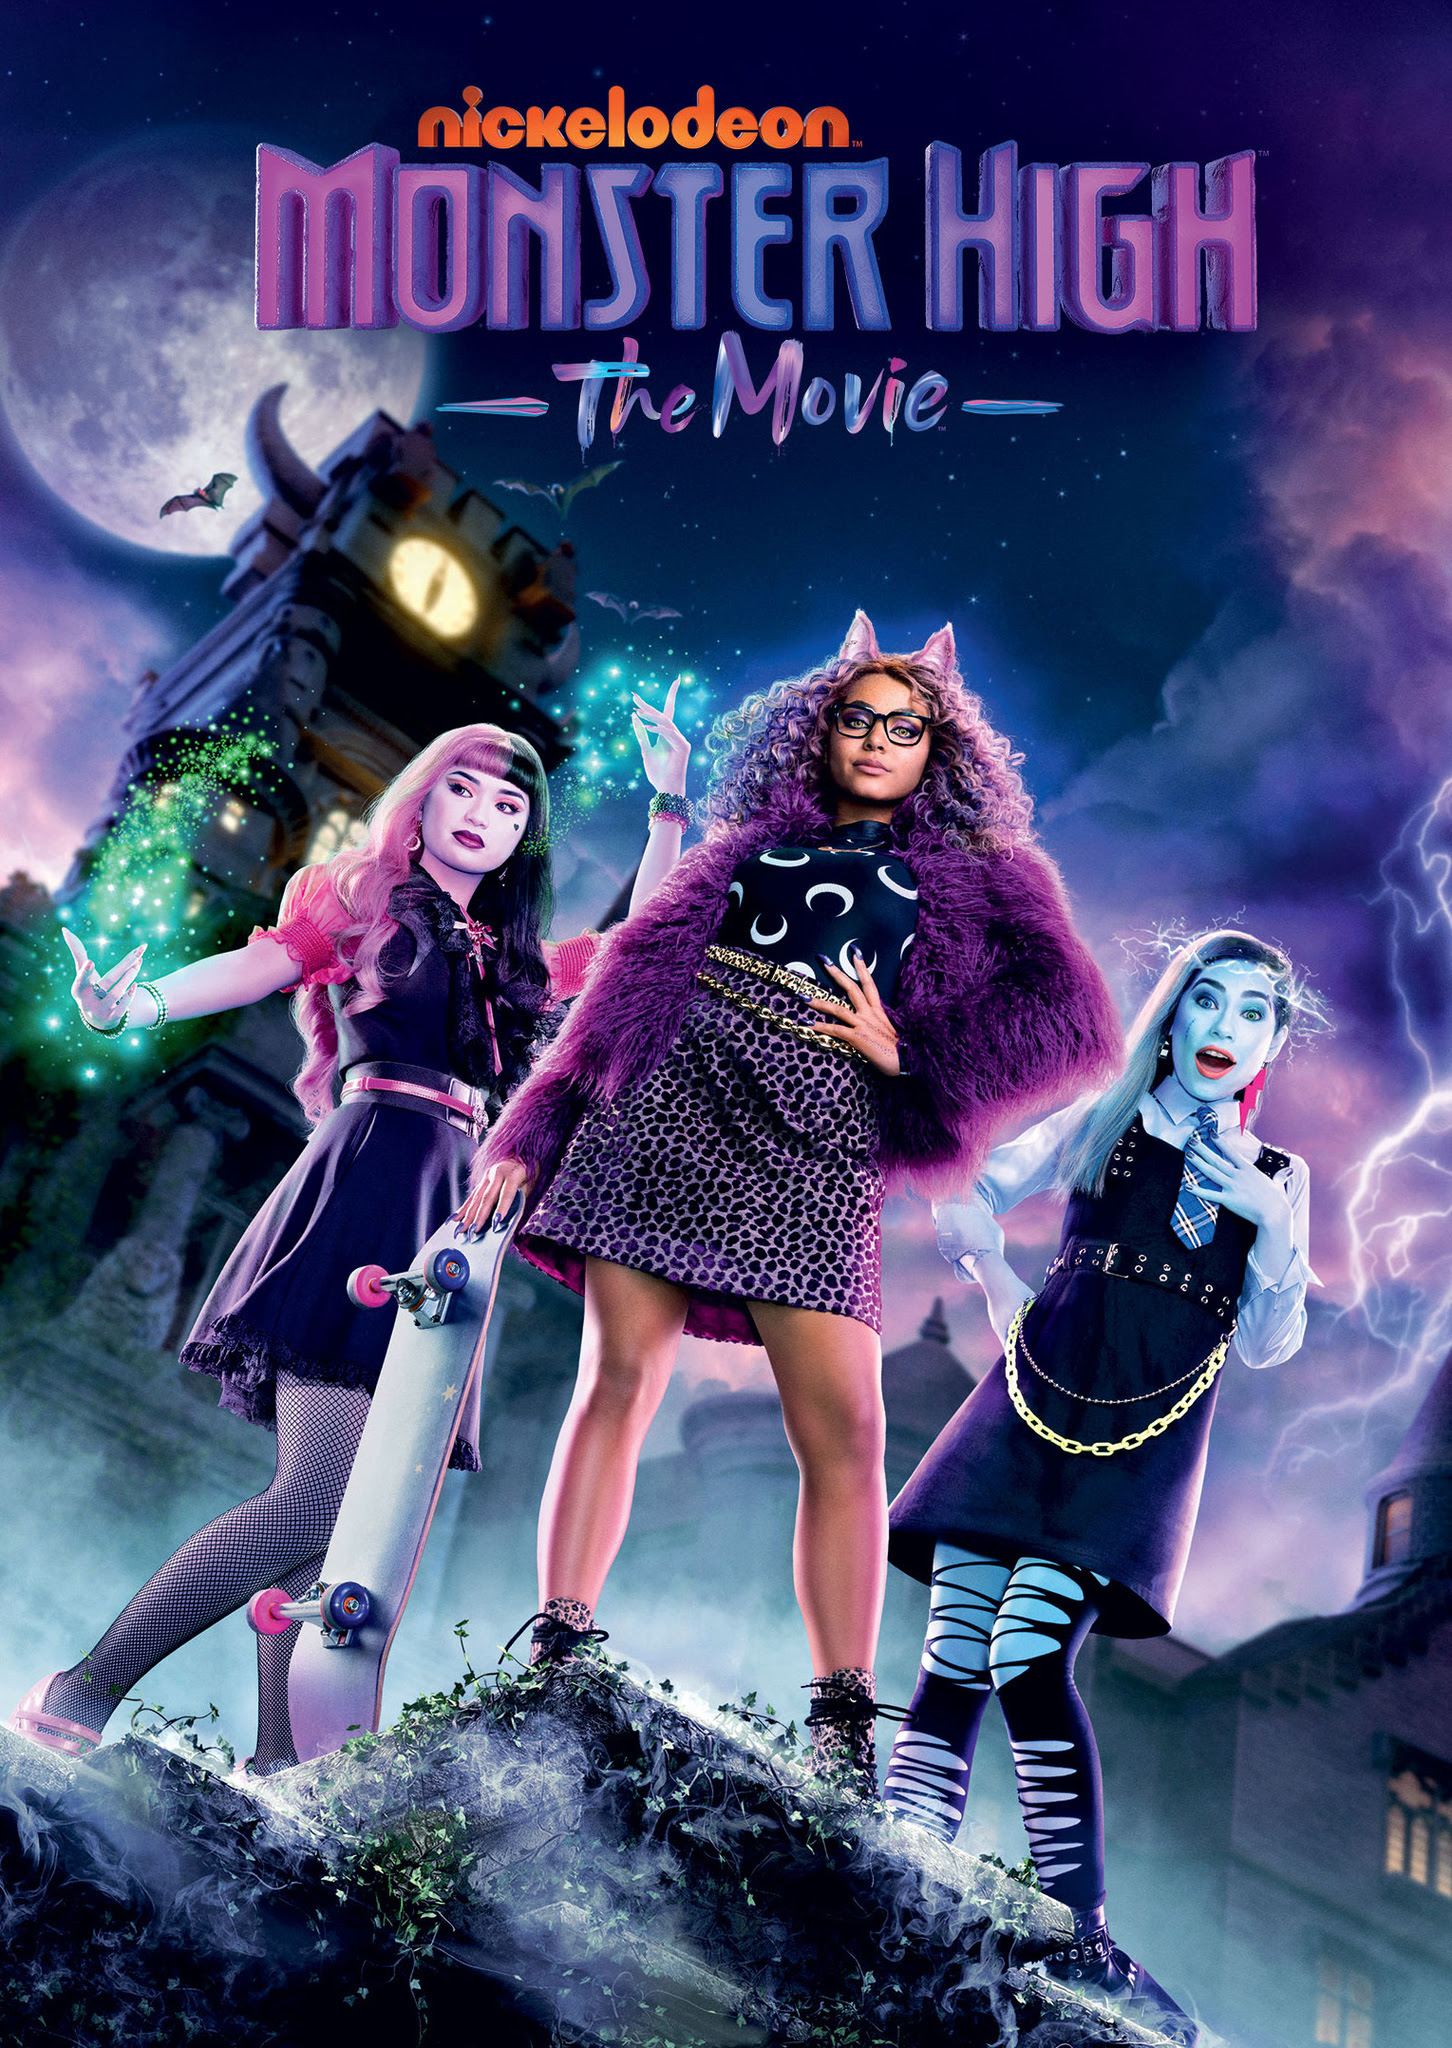 monster high the movie is coming to dvd on august 15